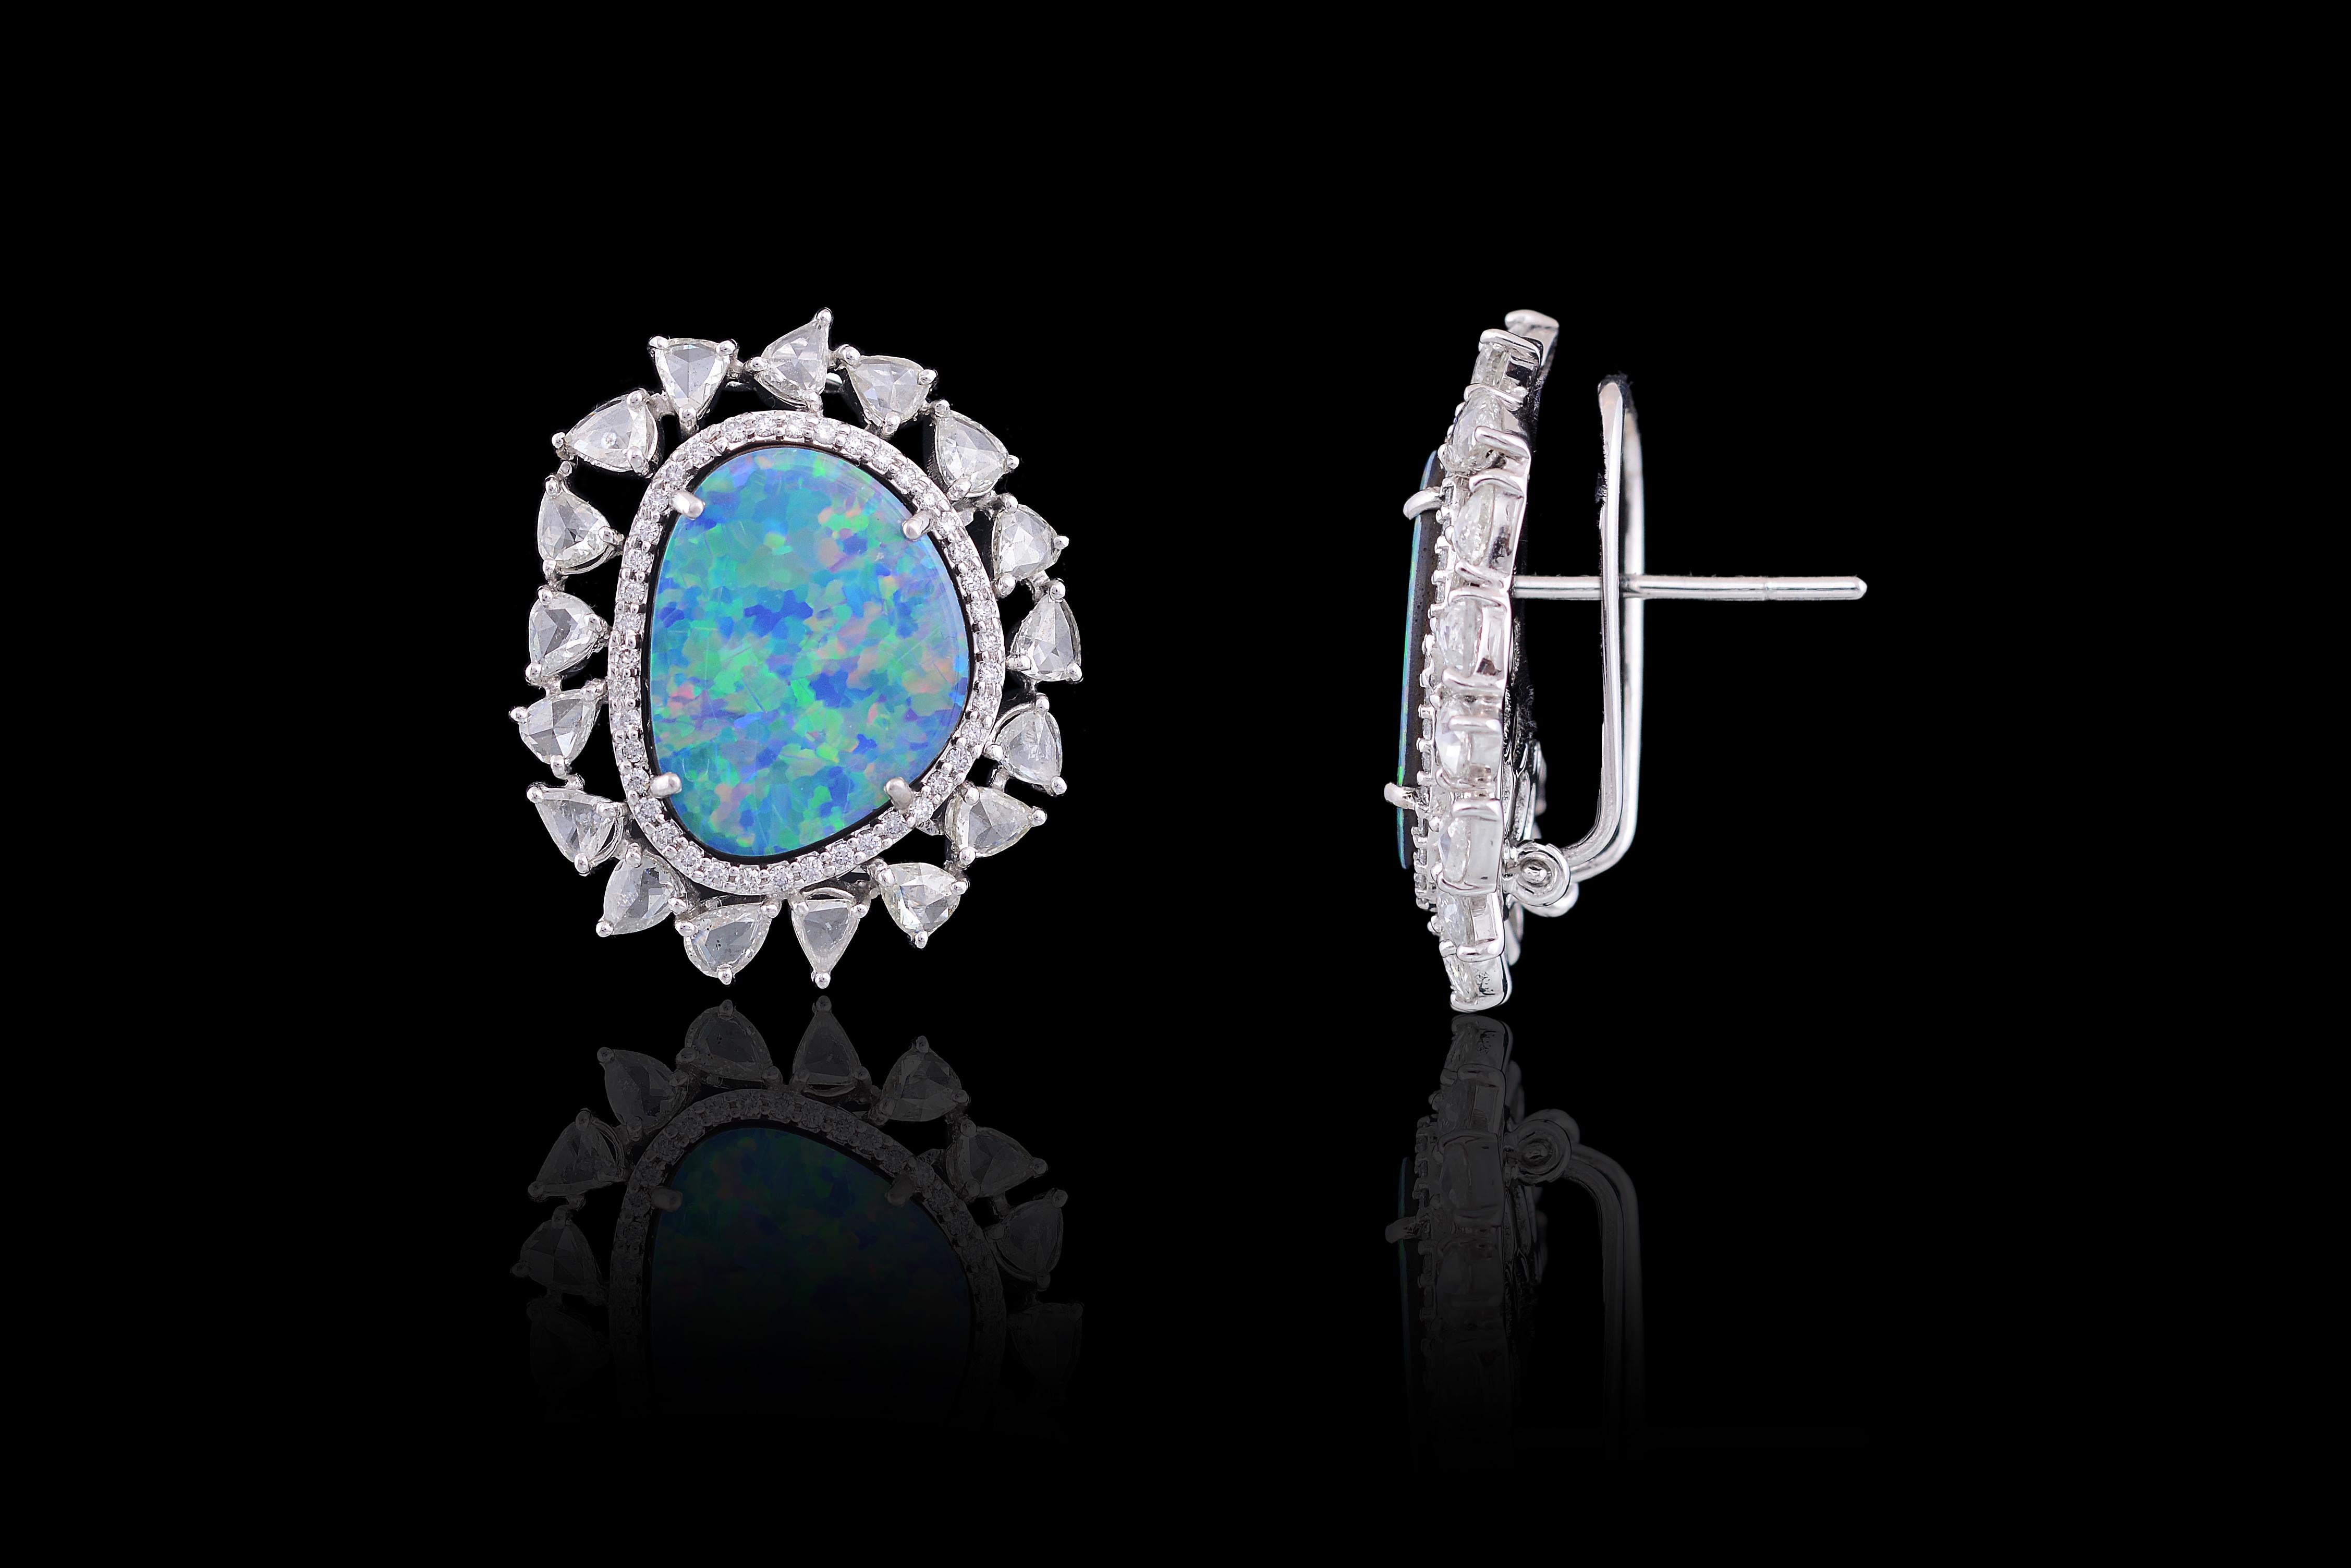 Stunning Australian doublet opal studs set in 18K white gold and rose cut diamonds. The doublet opal weigh 9.64 carats, whereas the total weight of the diamond is 3.19 carats. The earrings have a clip back and a simple pull - push mechanism for